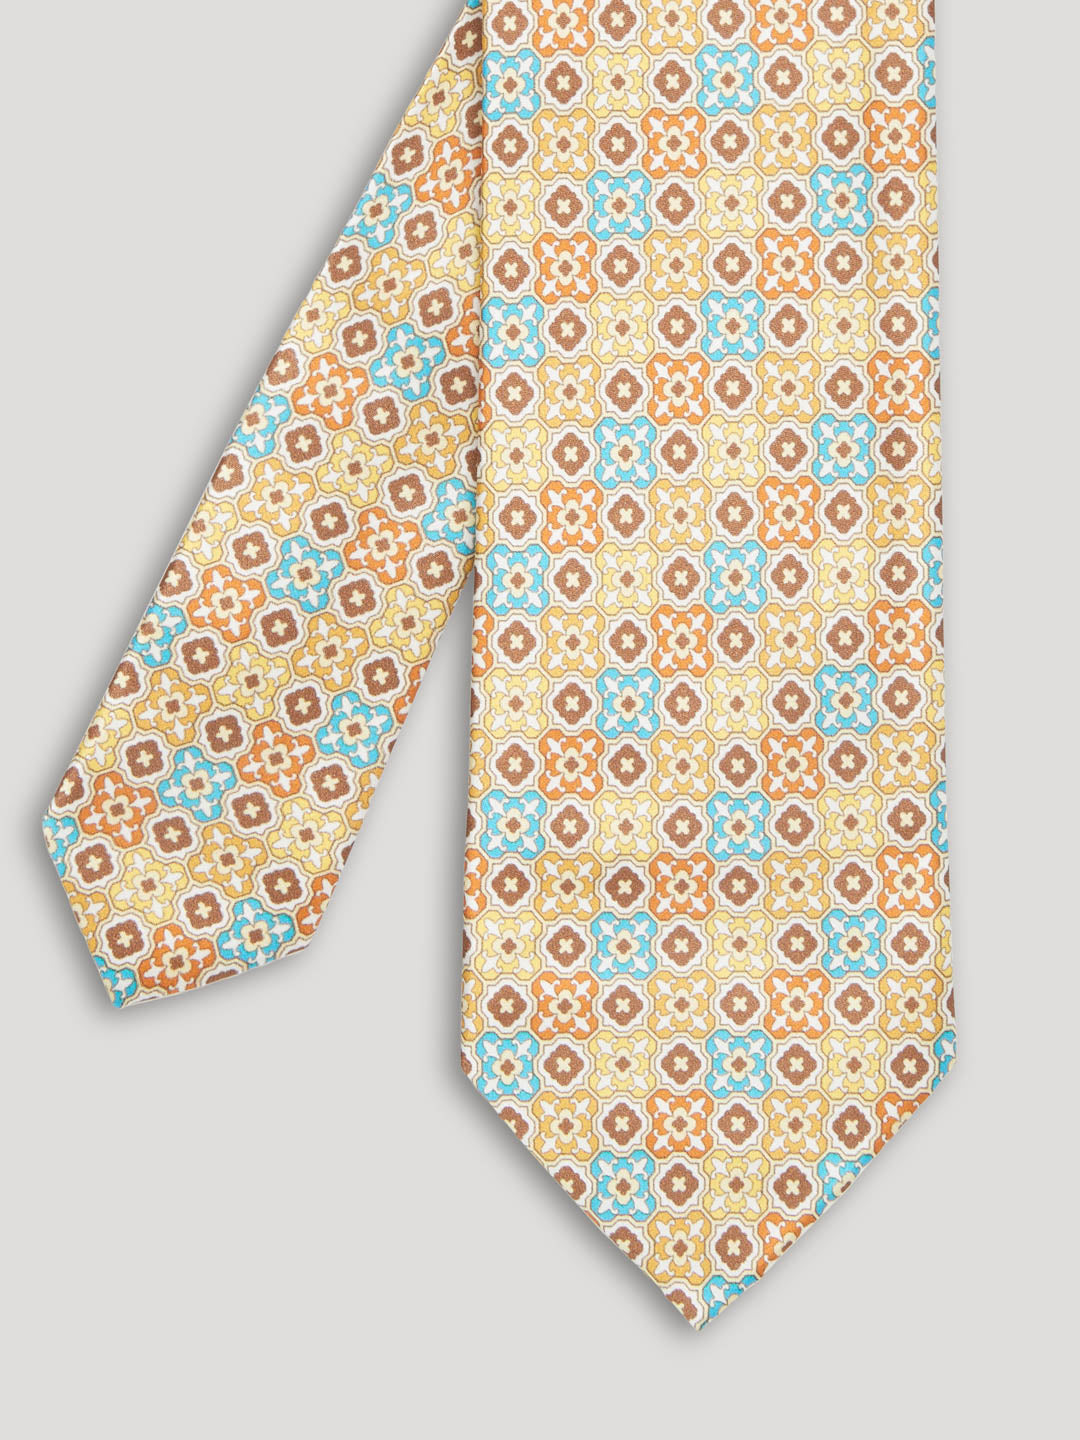 Yellow blue and beige tie with large pattern